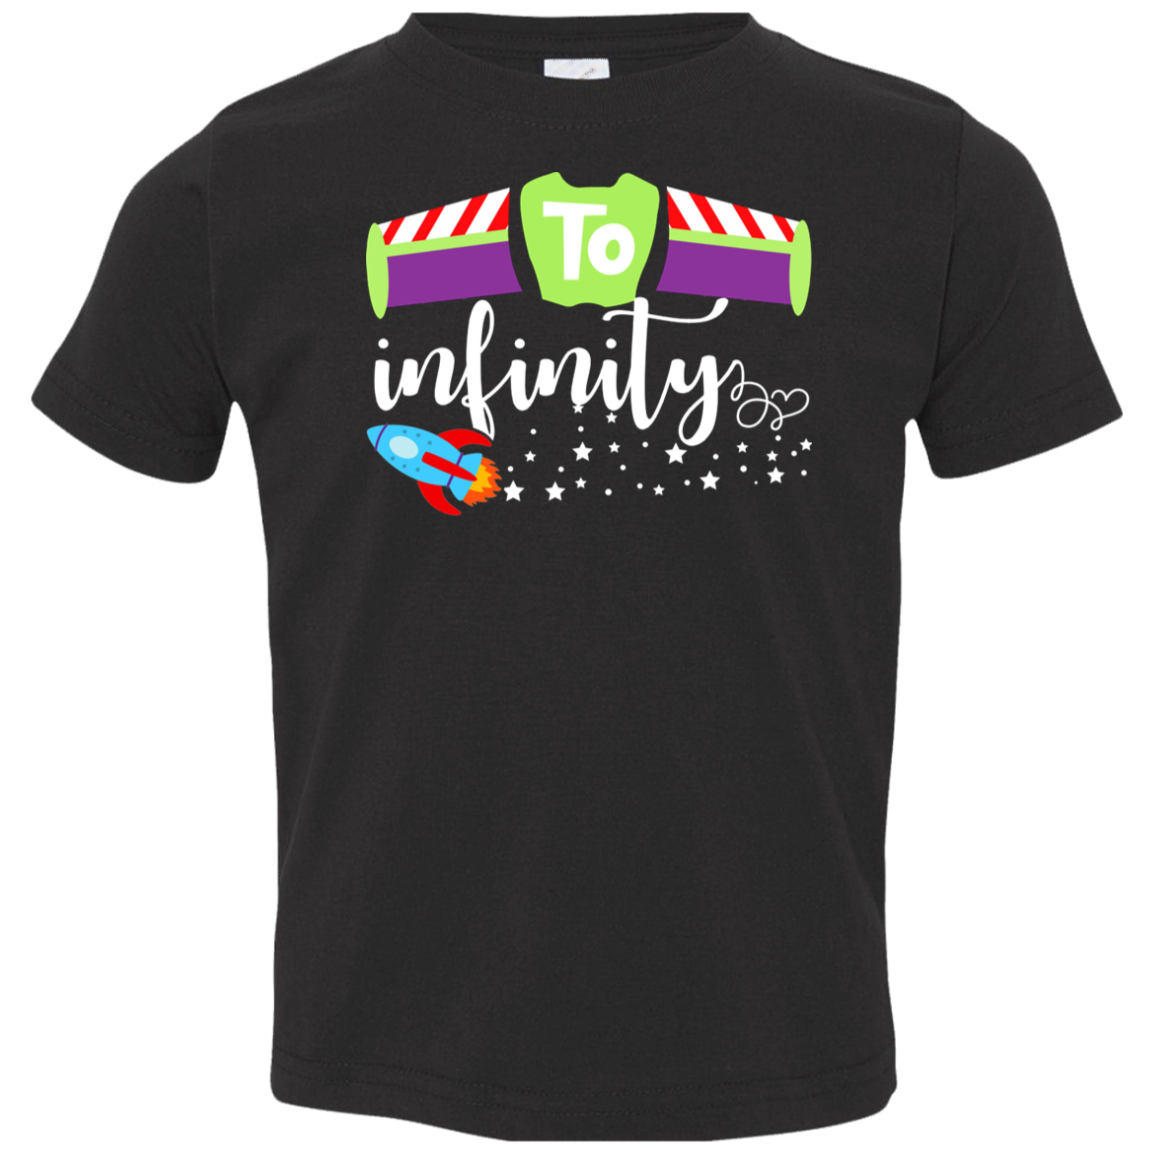 To Infinity Toddler Jersey T-Shirt